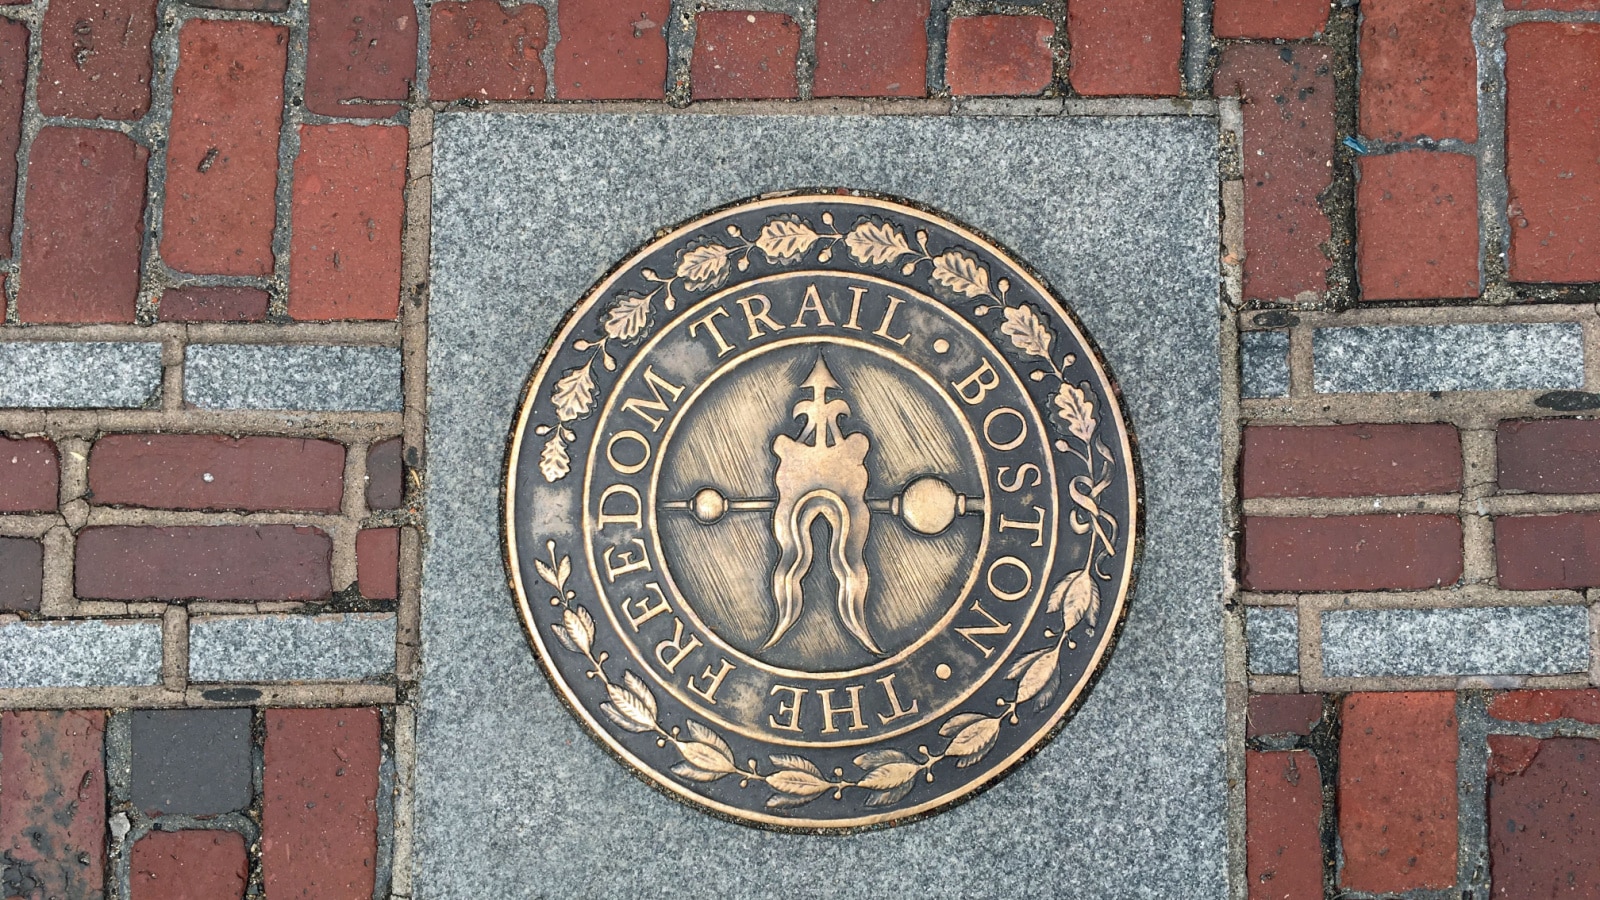 <p>Winding through Boston, the Freedom Trail is a must-visit for history buffs. It allows visitors to explore 16 significant sites, including the Old North Church and Paul Revere’s House.</p>